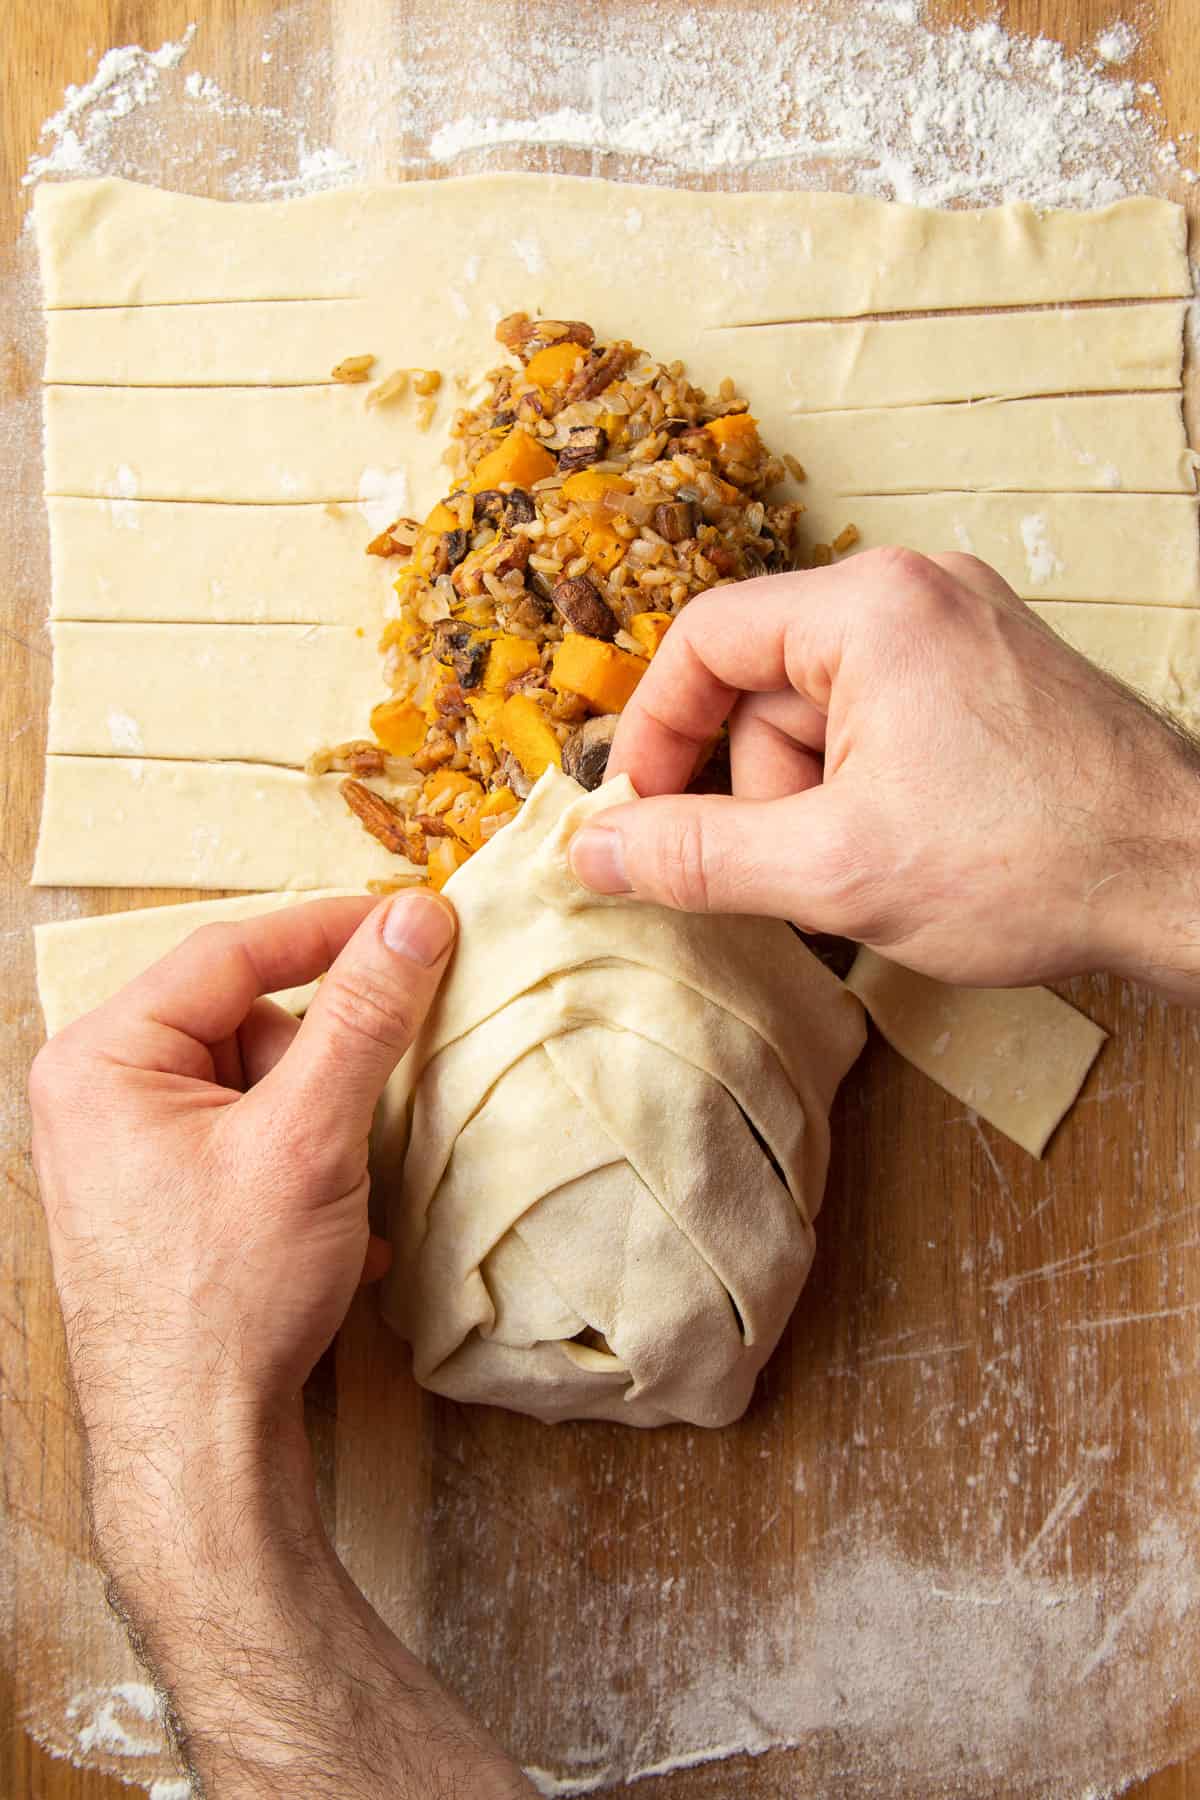 Hands braiding puff pastry over Vegetable Wellington filling.